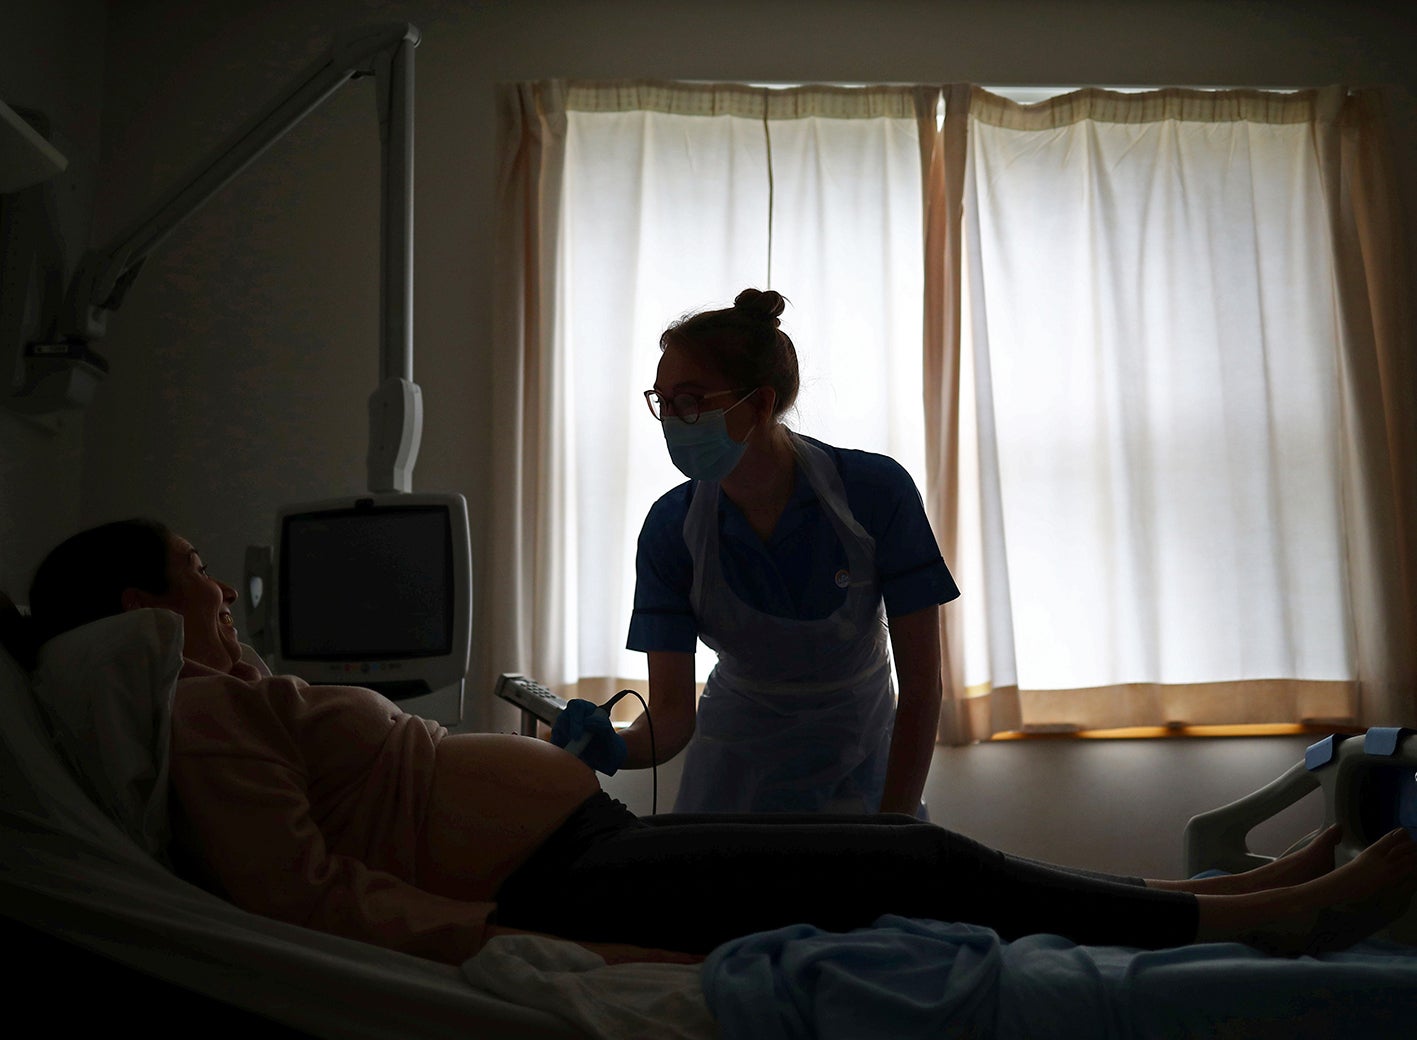 Midwives like me have been warning maternity units are unsafe for years